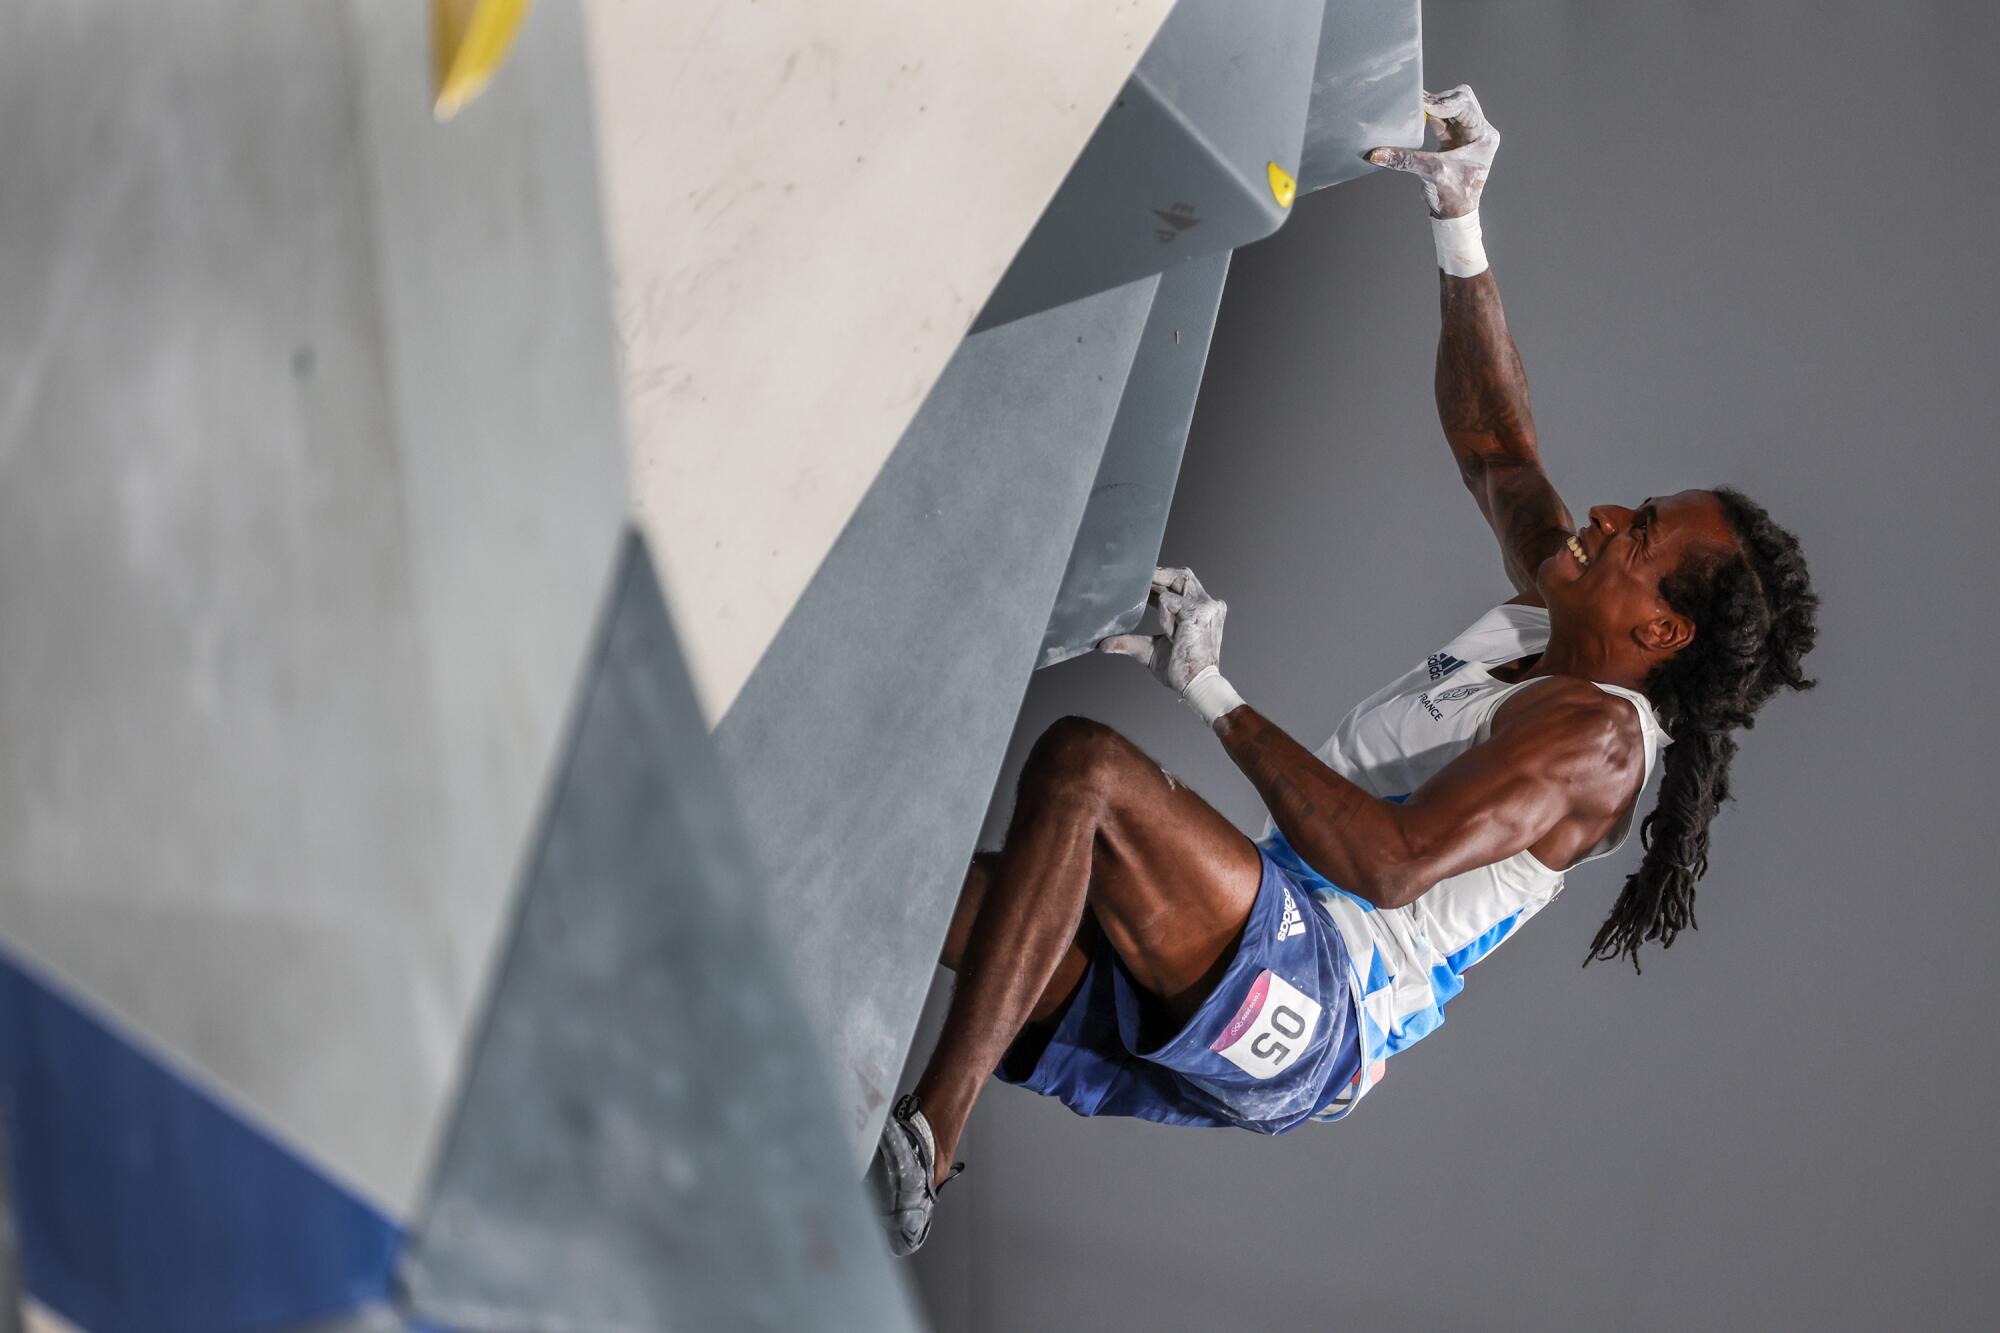 French climber Mikael Mawem uses his fingers to get him through a tough part of the Men's Combined Bouldering Final.